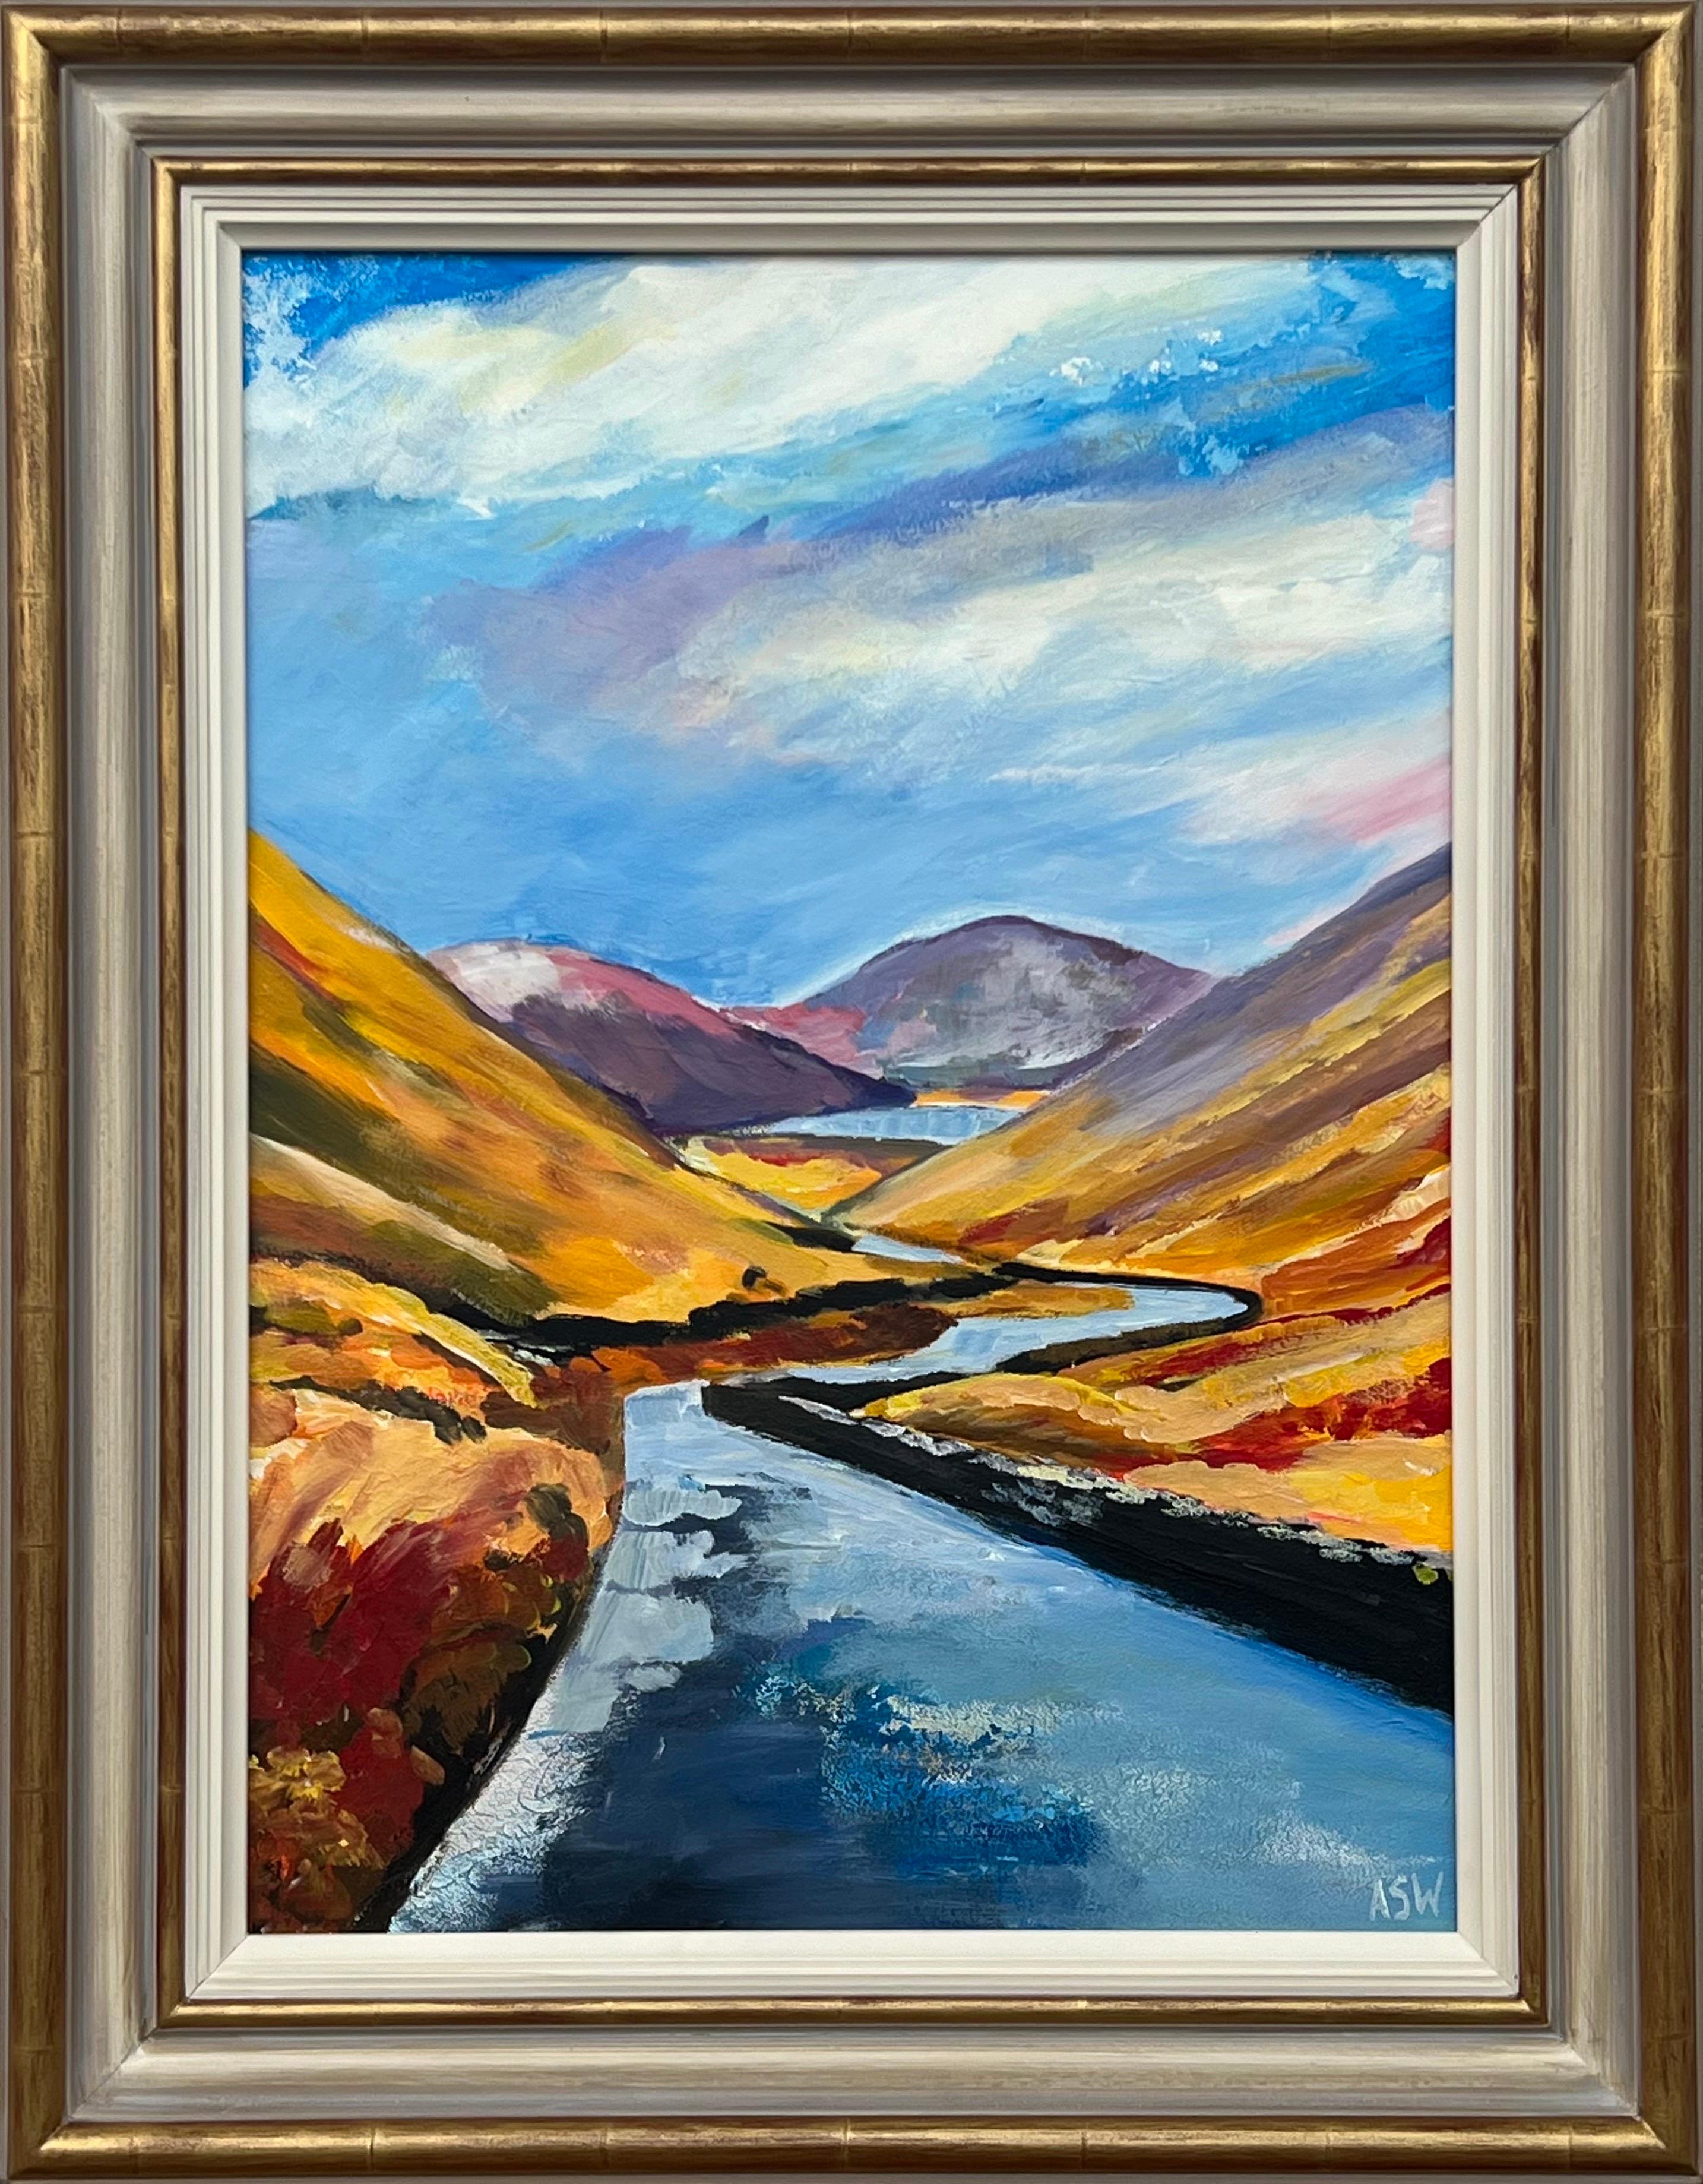 Angela Wakefield Abstract Painting – A Memory of Kirkstone Pass Mountain Landschaft im Lake District von England